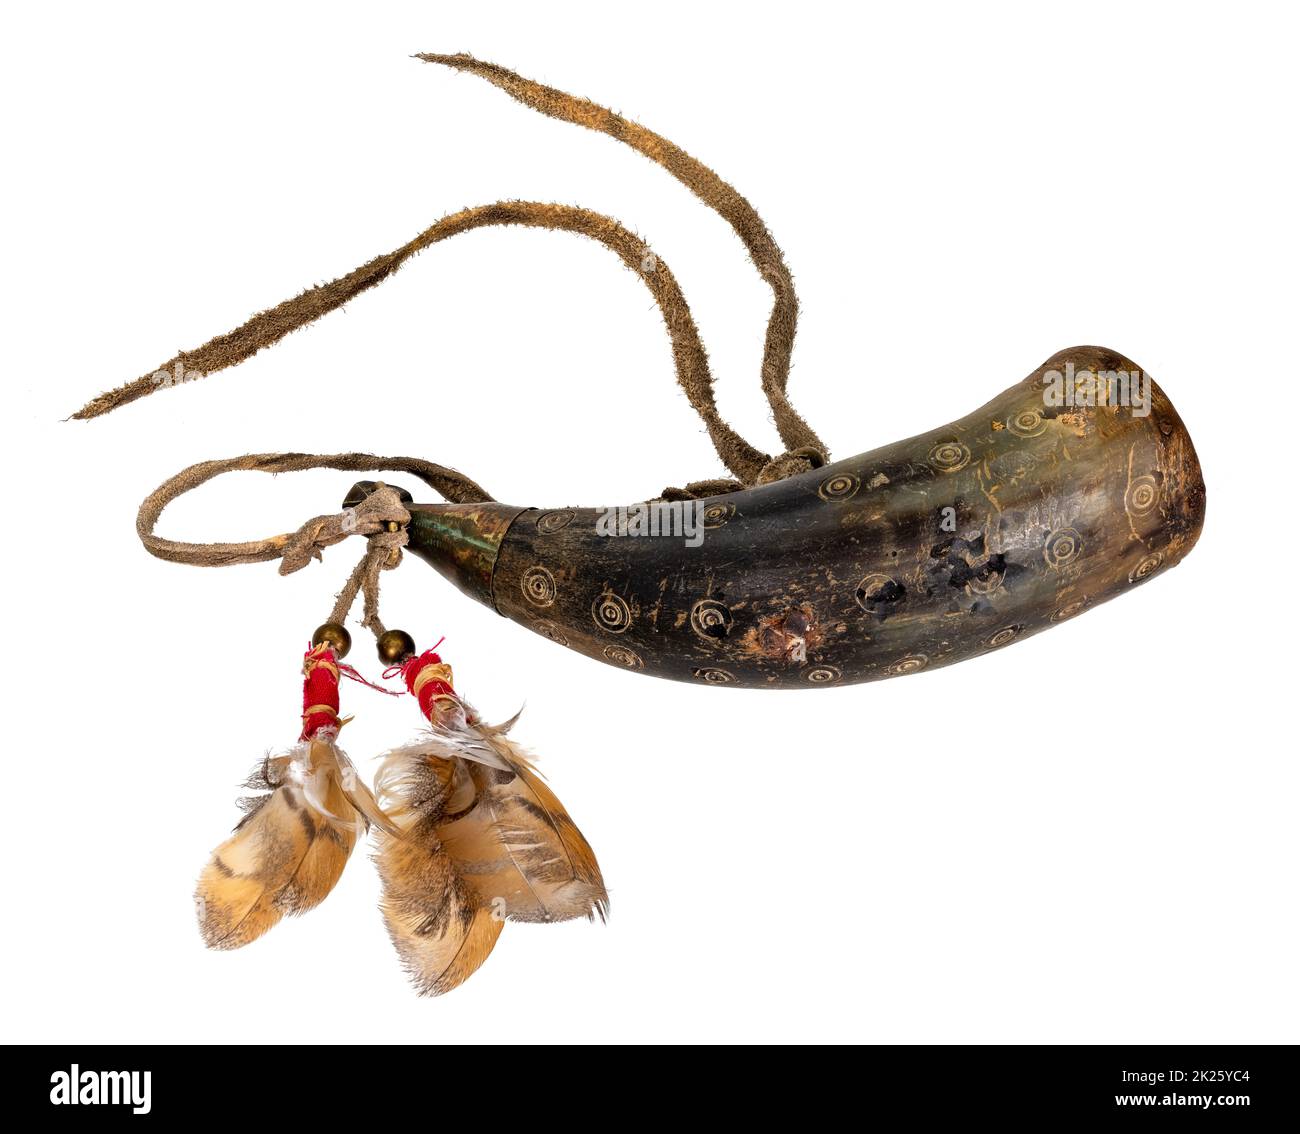 Old powder horn of the North American Indians made of horn decorated with deerskin and feathers Stock Photo